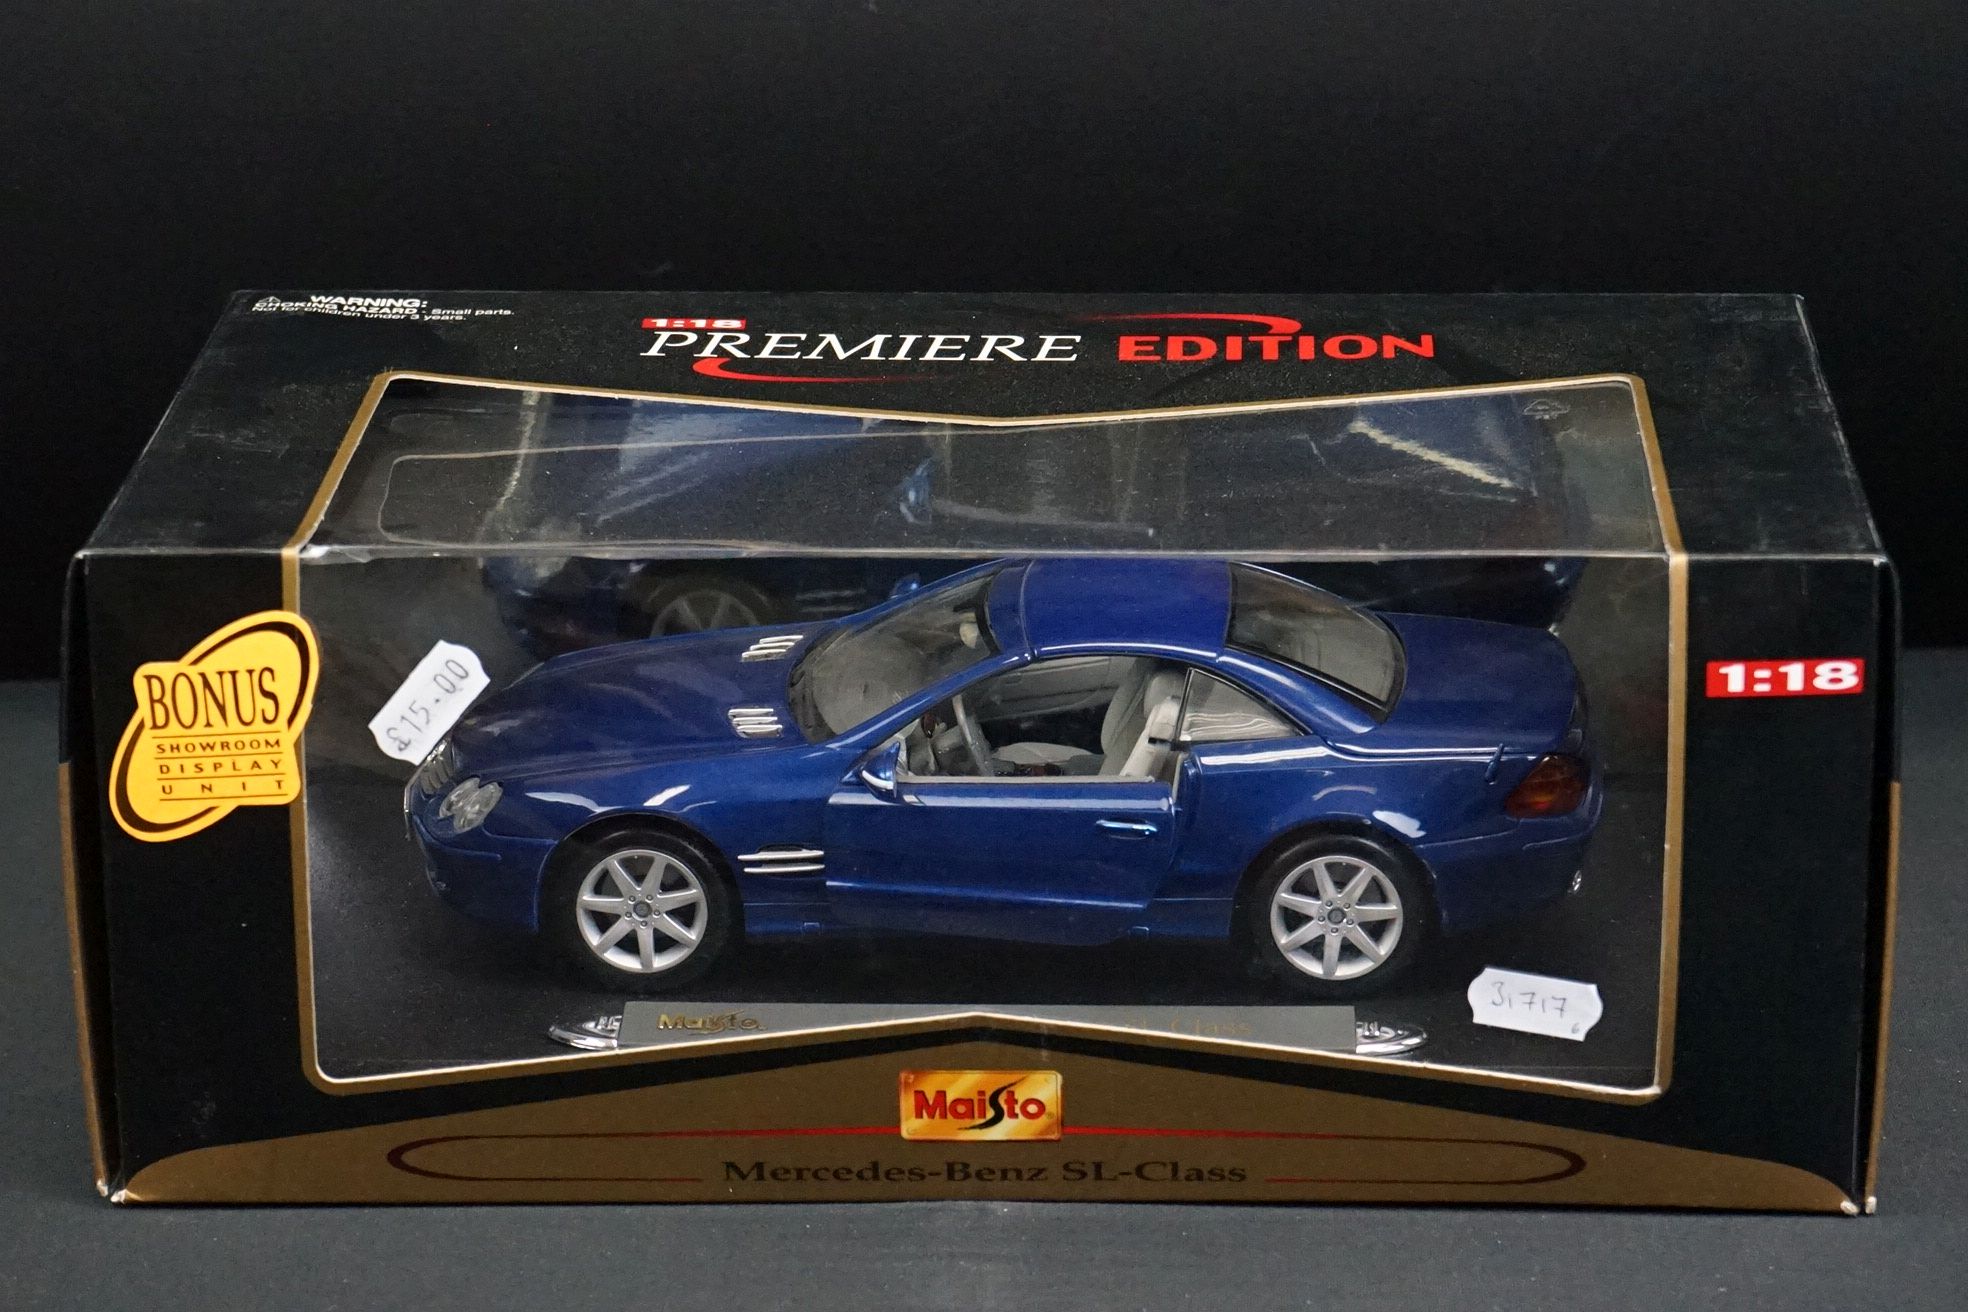 Four boxed Maisto 1/18 diecast models to include 3 x Premiere Edition (2 x Mercedes Benz SL Class, - Image 17 of 18